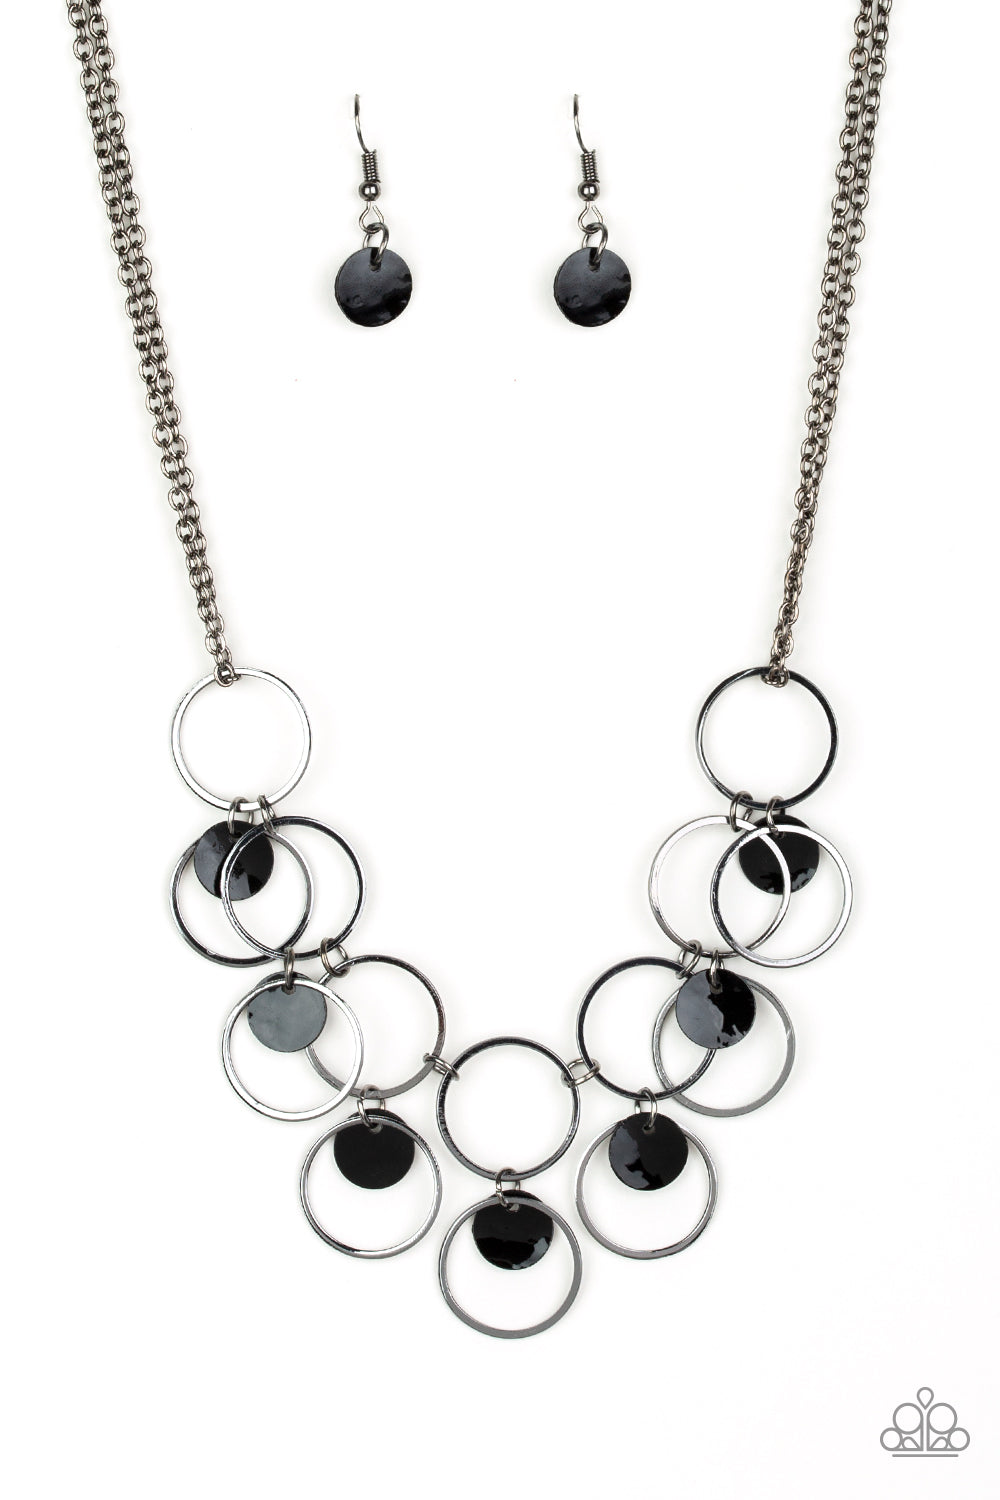 Paparazzi Ask and You SHELL Receive Black Short Necklace